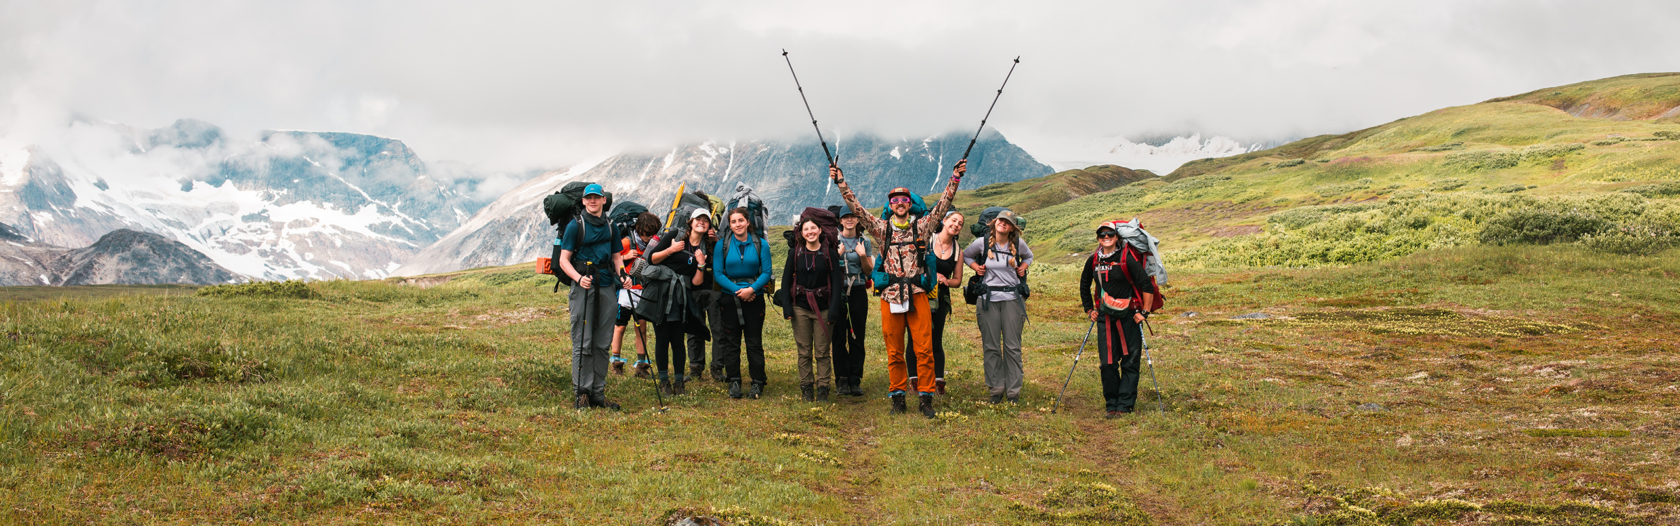 Group of people hiking in a field in front of large Alaskan mountains.